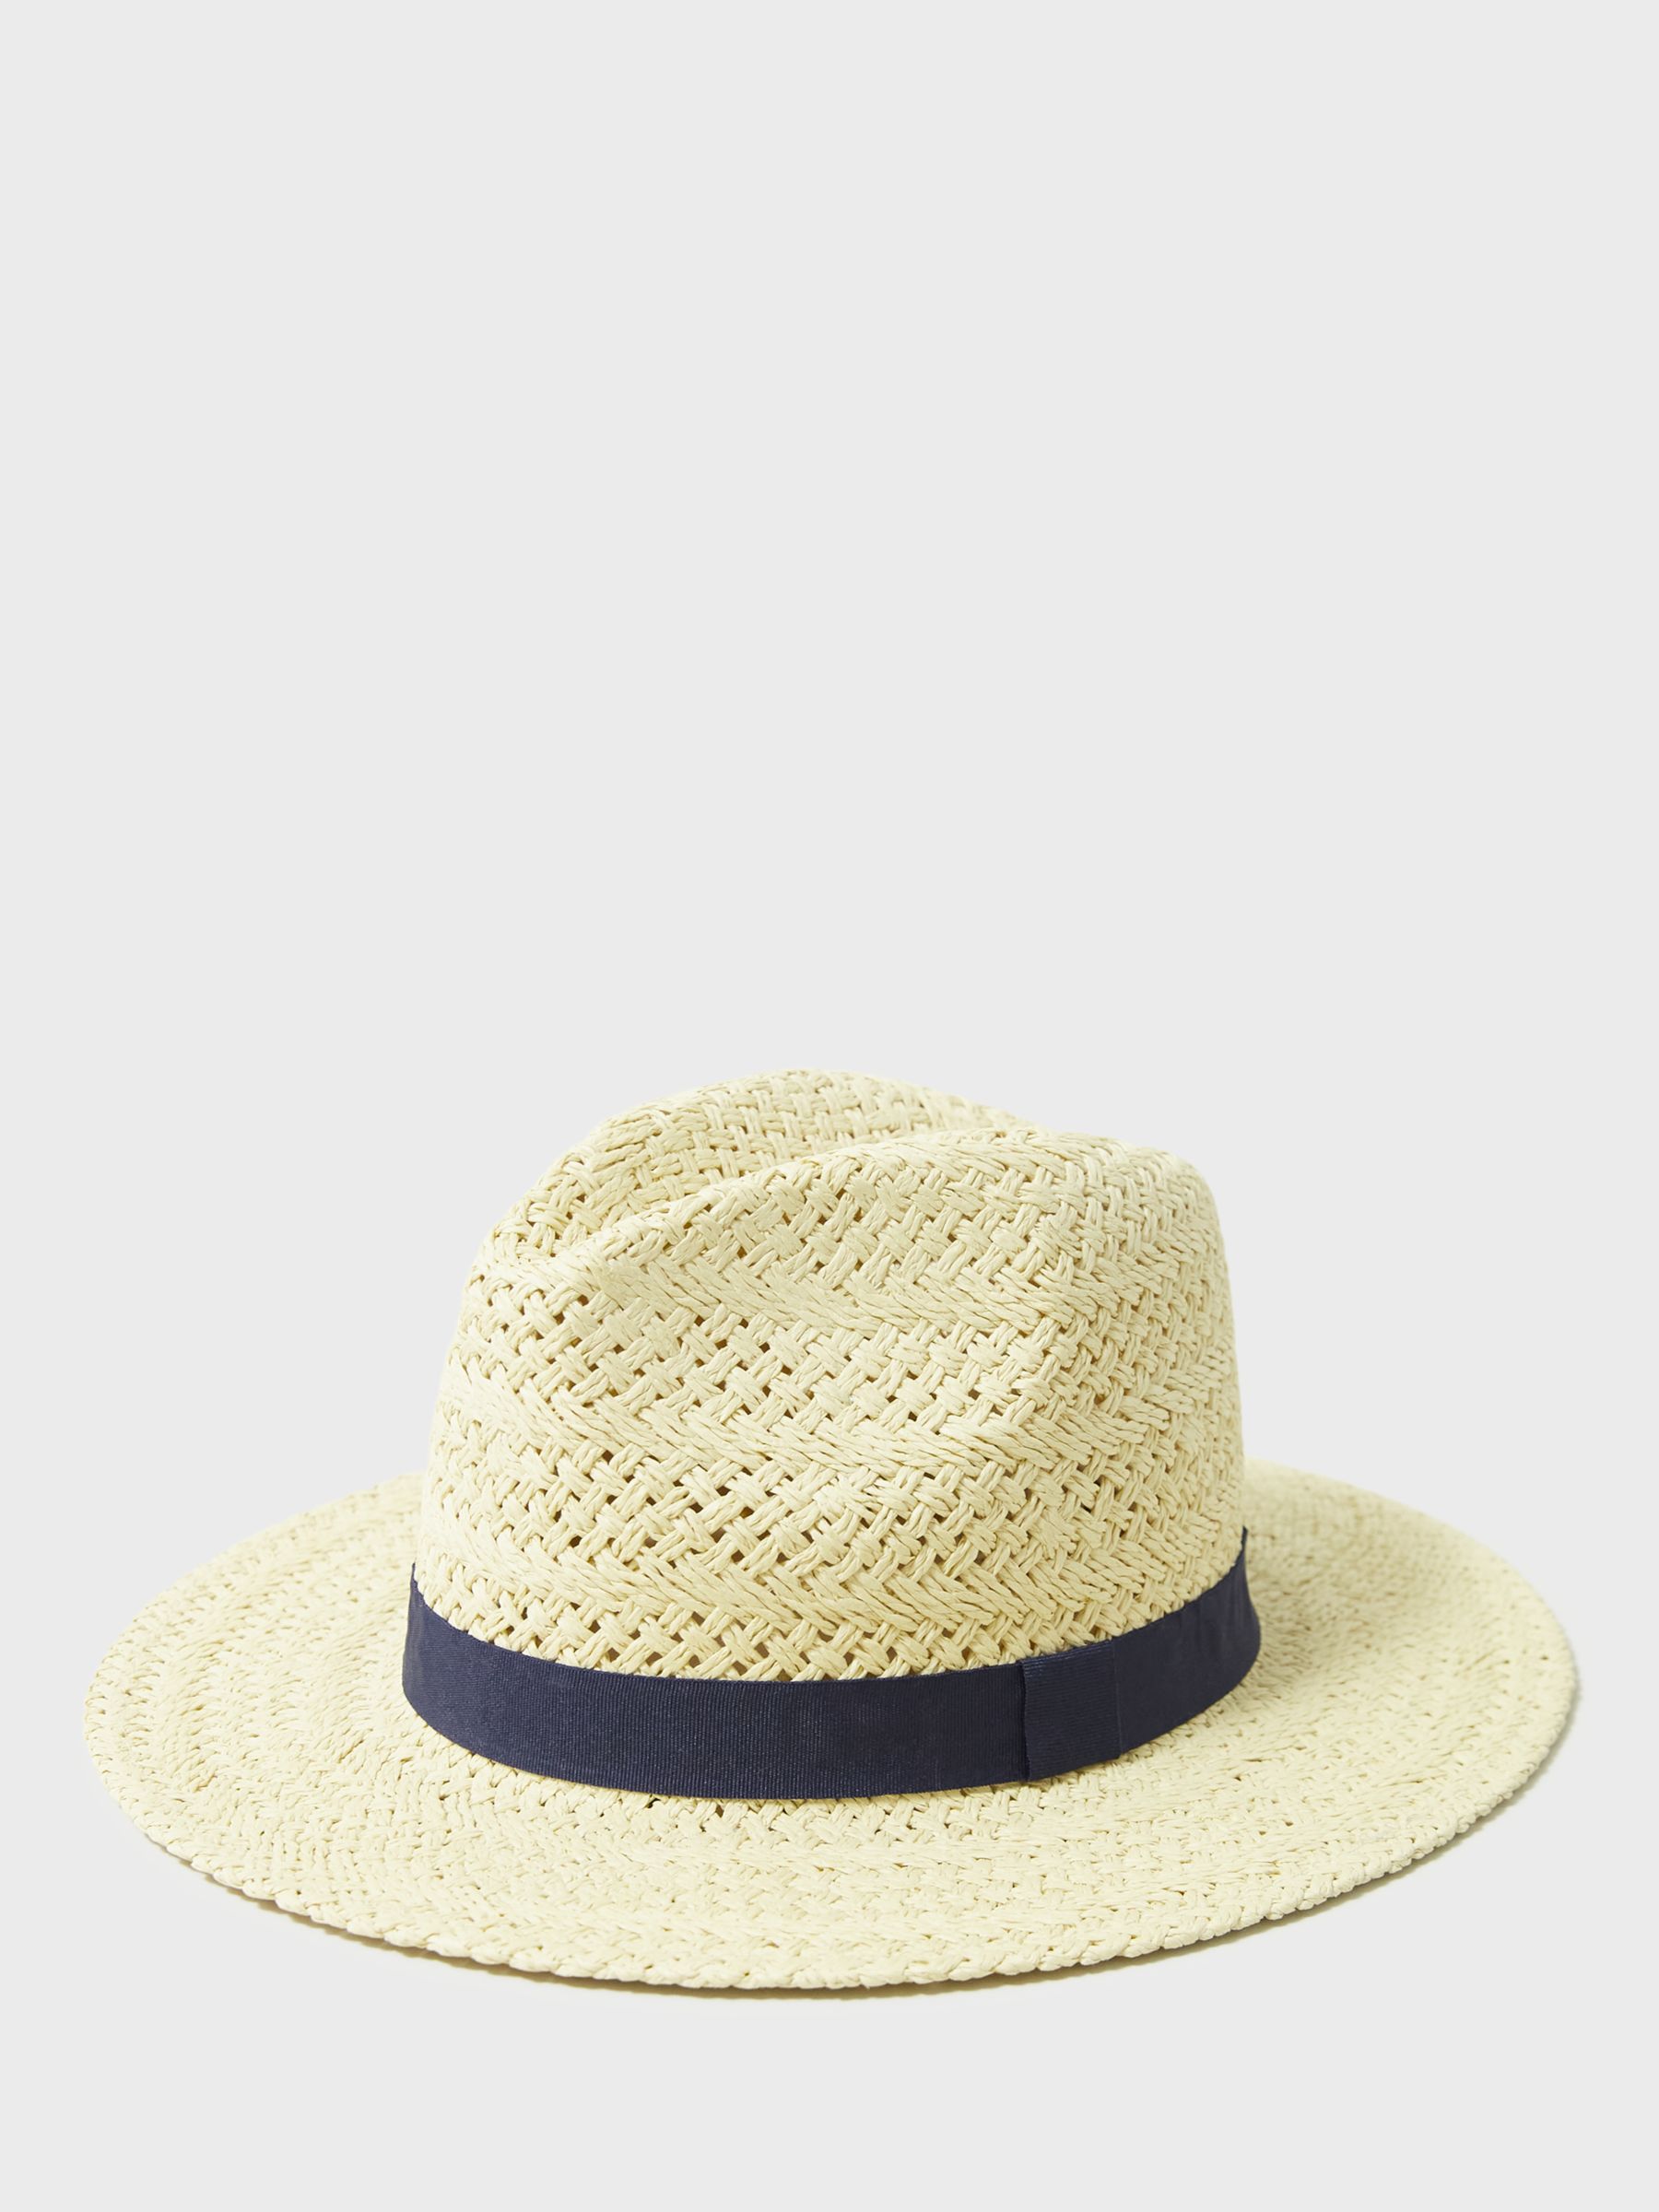 Crew Clothing Woven Trilby Hat, Neutral/Navy, One Size